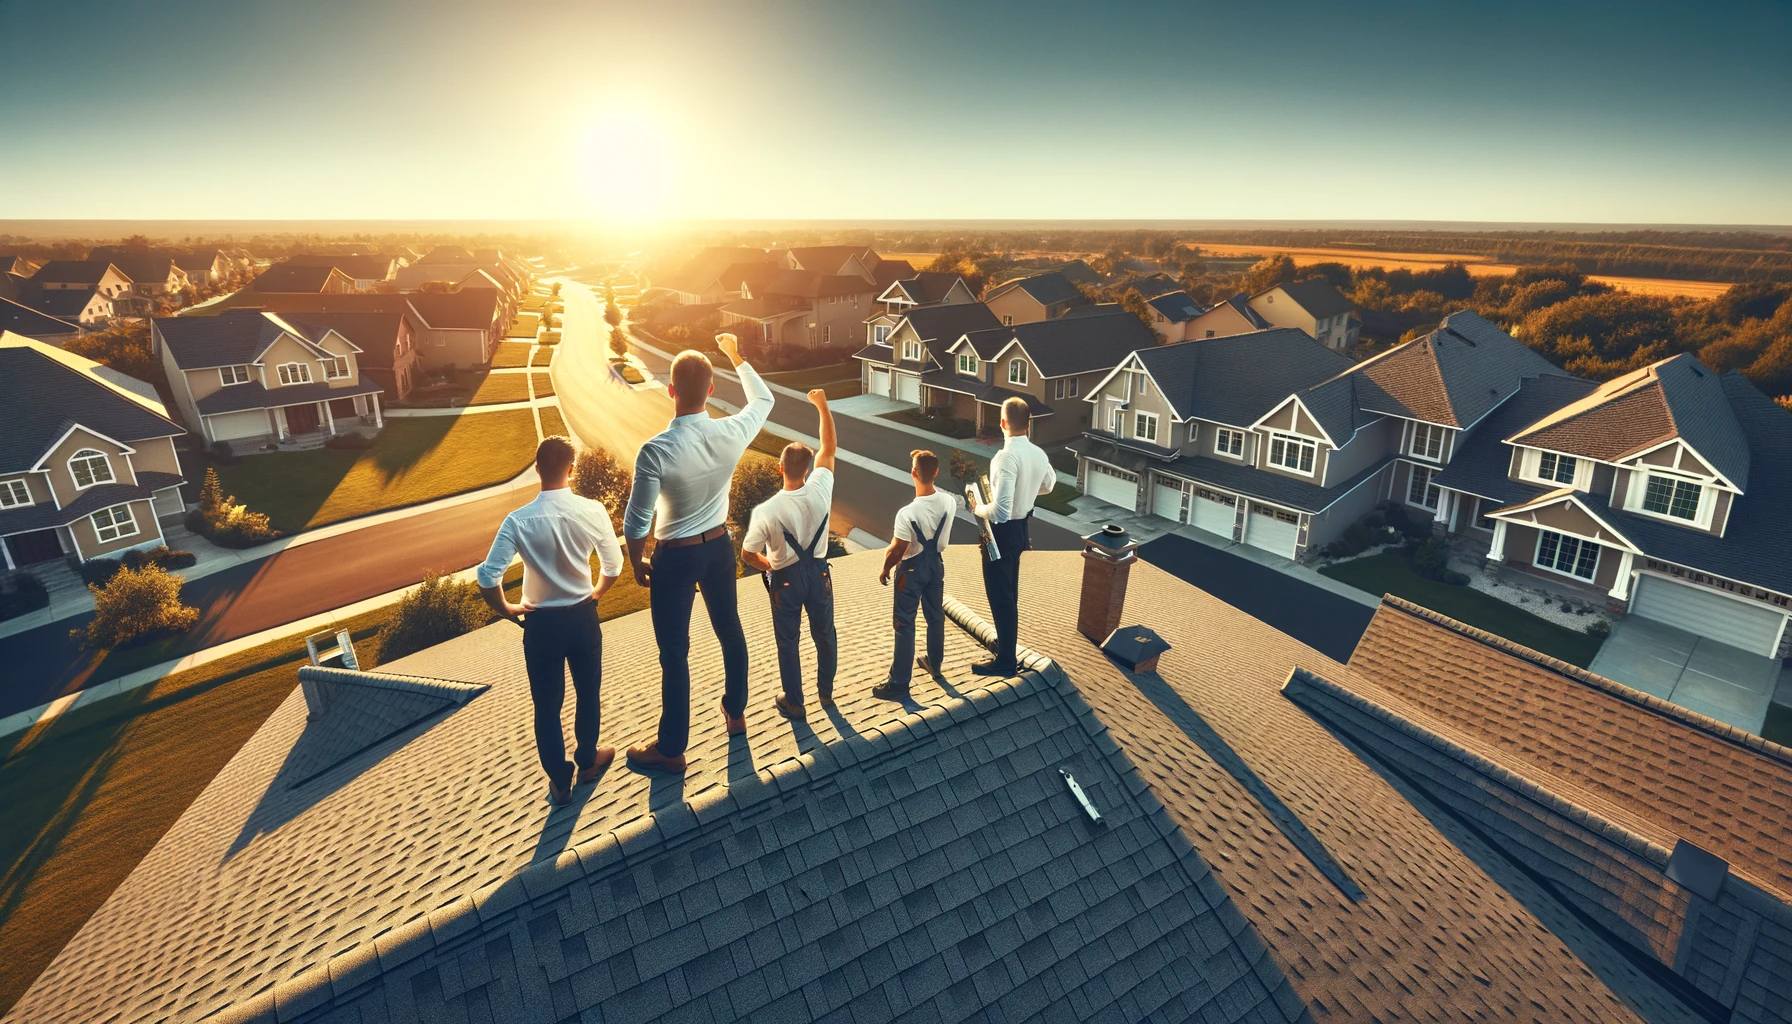 5 Key Strategies for Becoming a Top Roofing Contractor in the U.S.